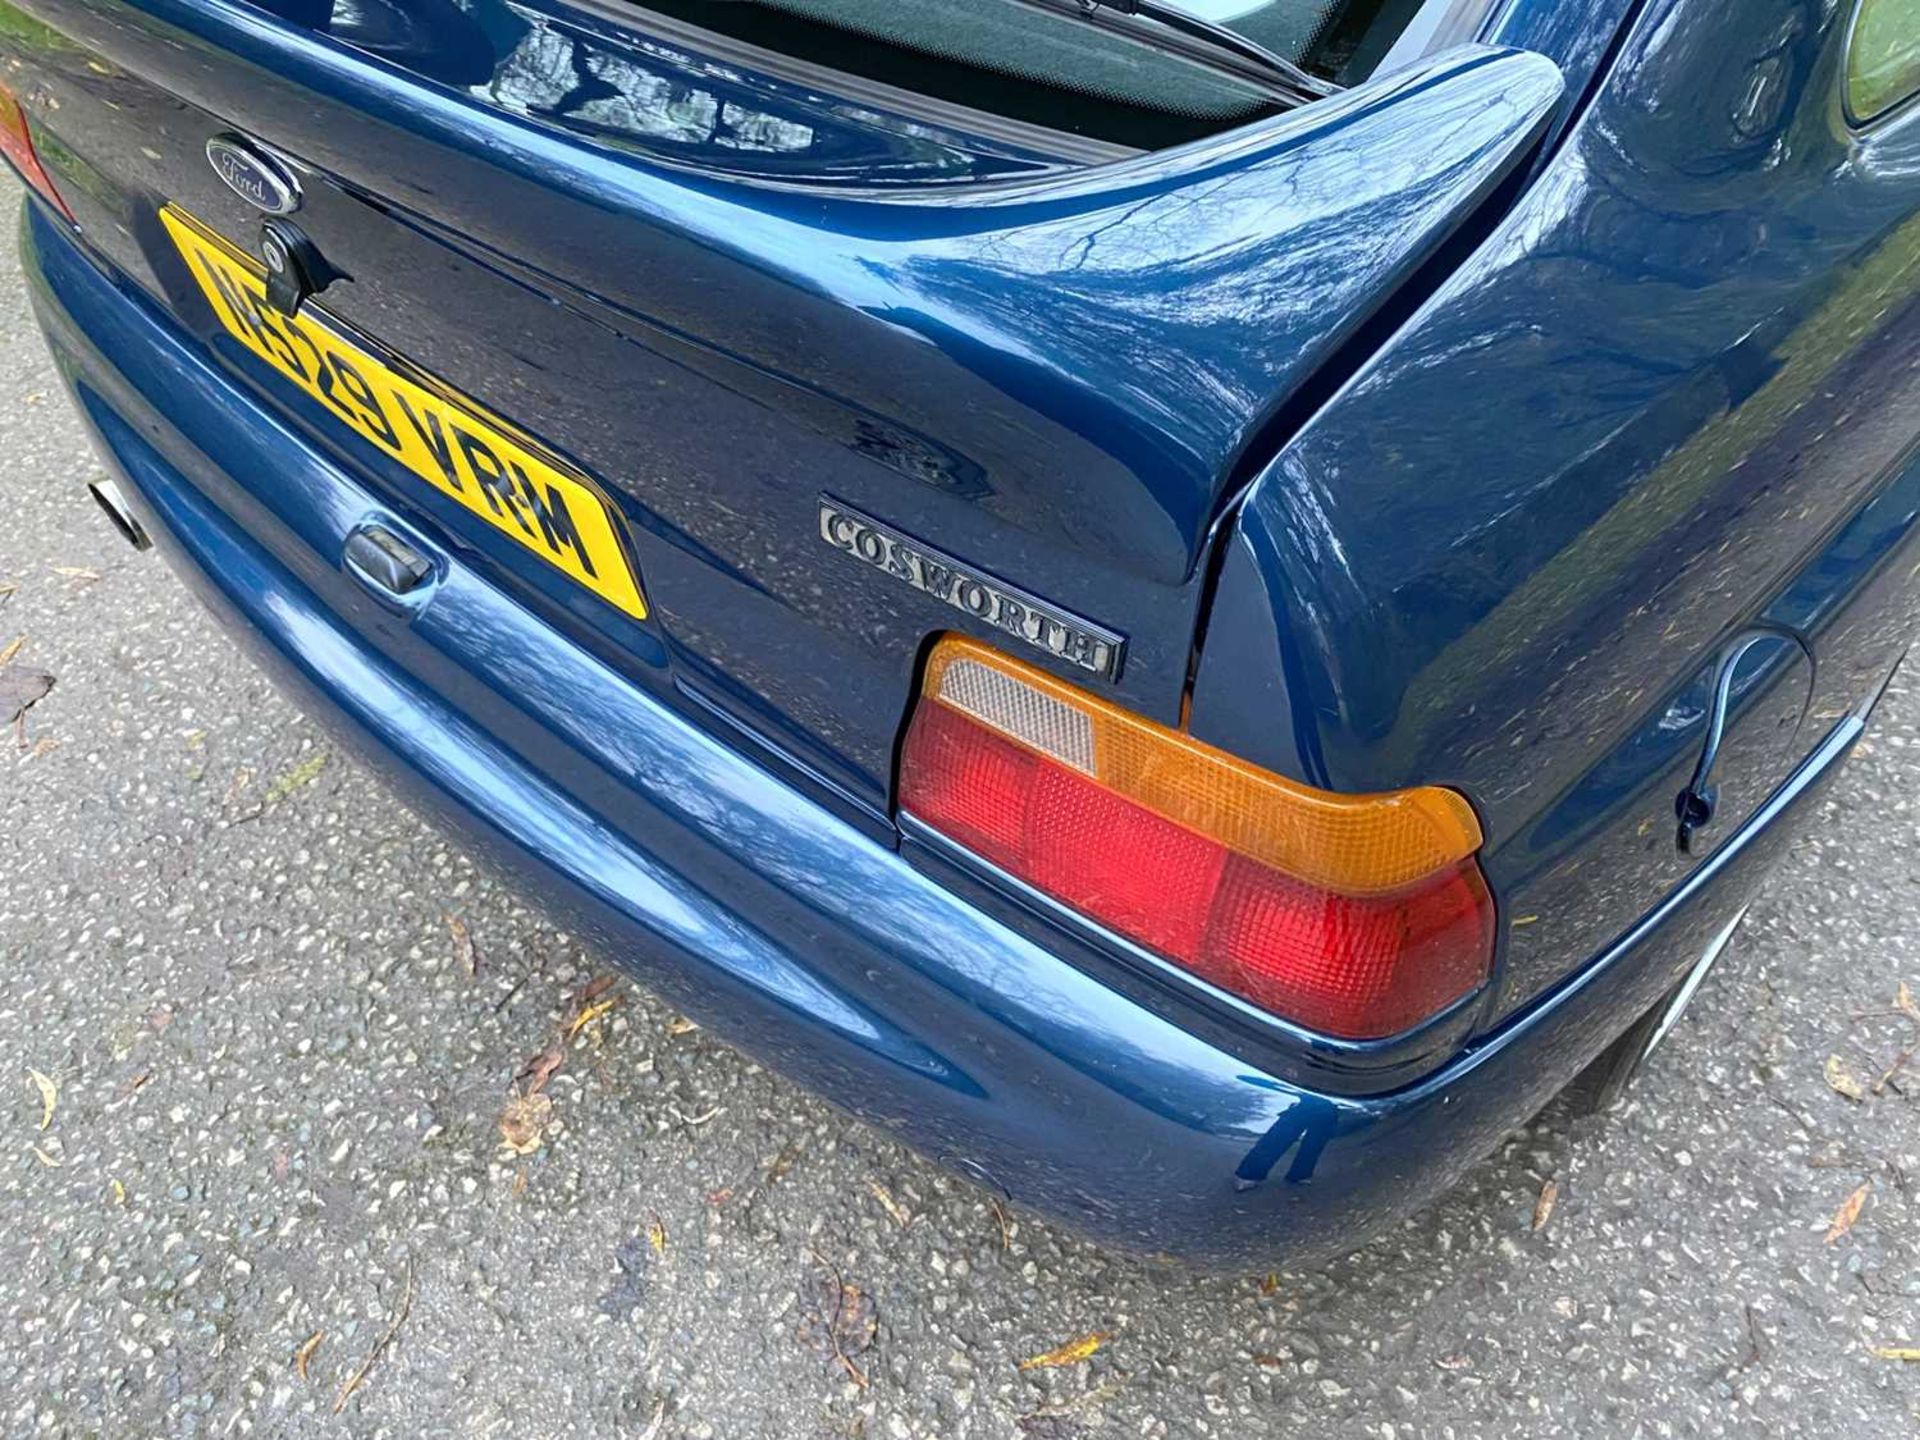 1995 Ford Escort RS Cosworth LUX Only 56,000 miles, finished in rare Petrol Blue - Image 93 of 98